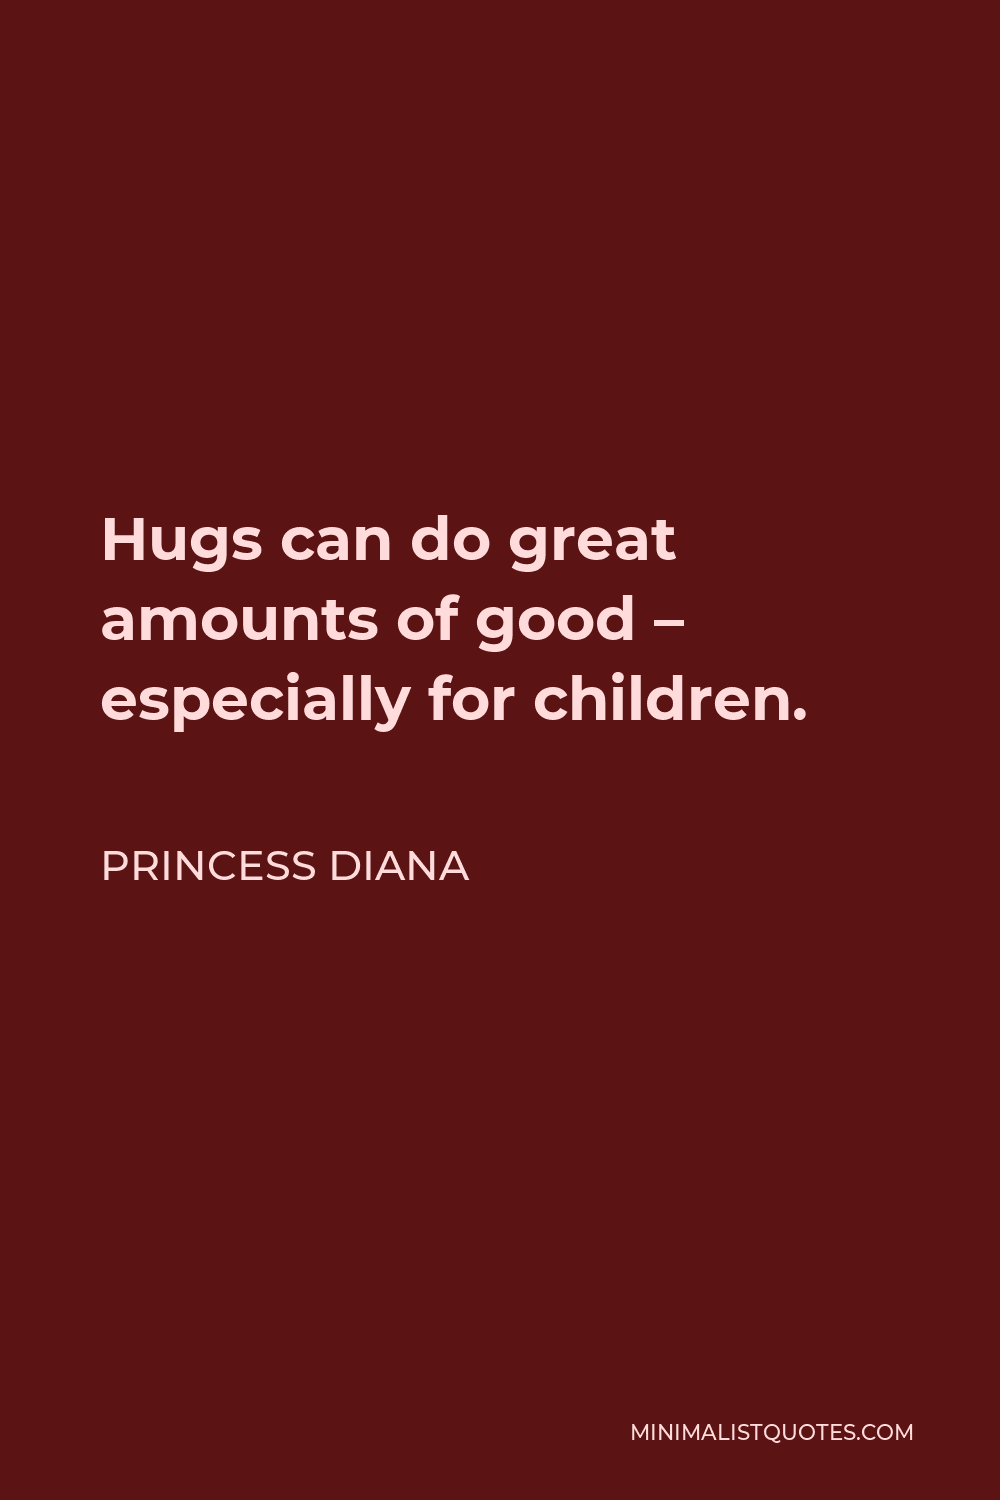 Princess Diana Quote - Hugs can do great amounts of good – especially for children.